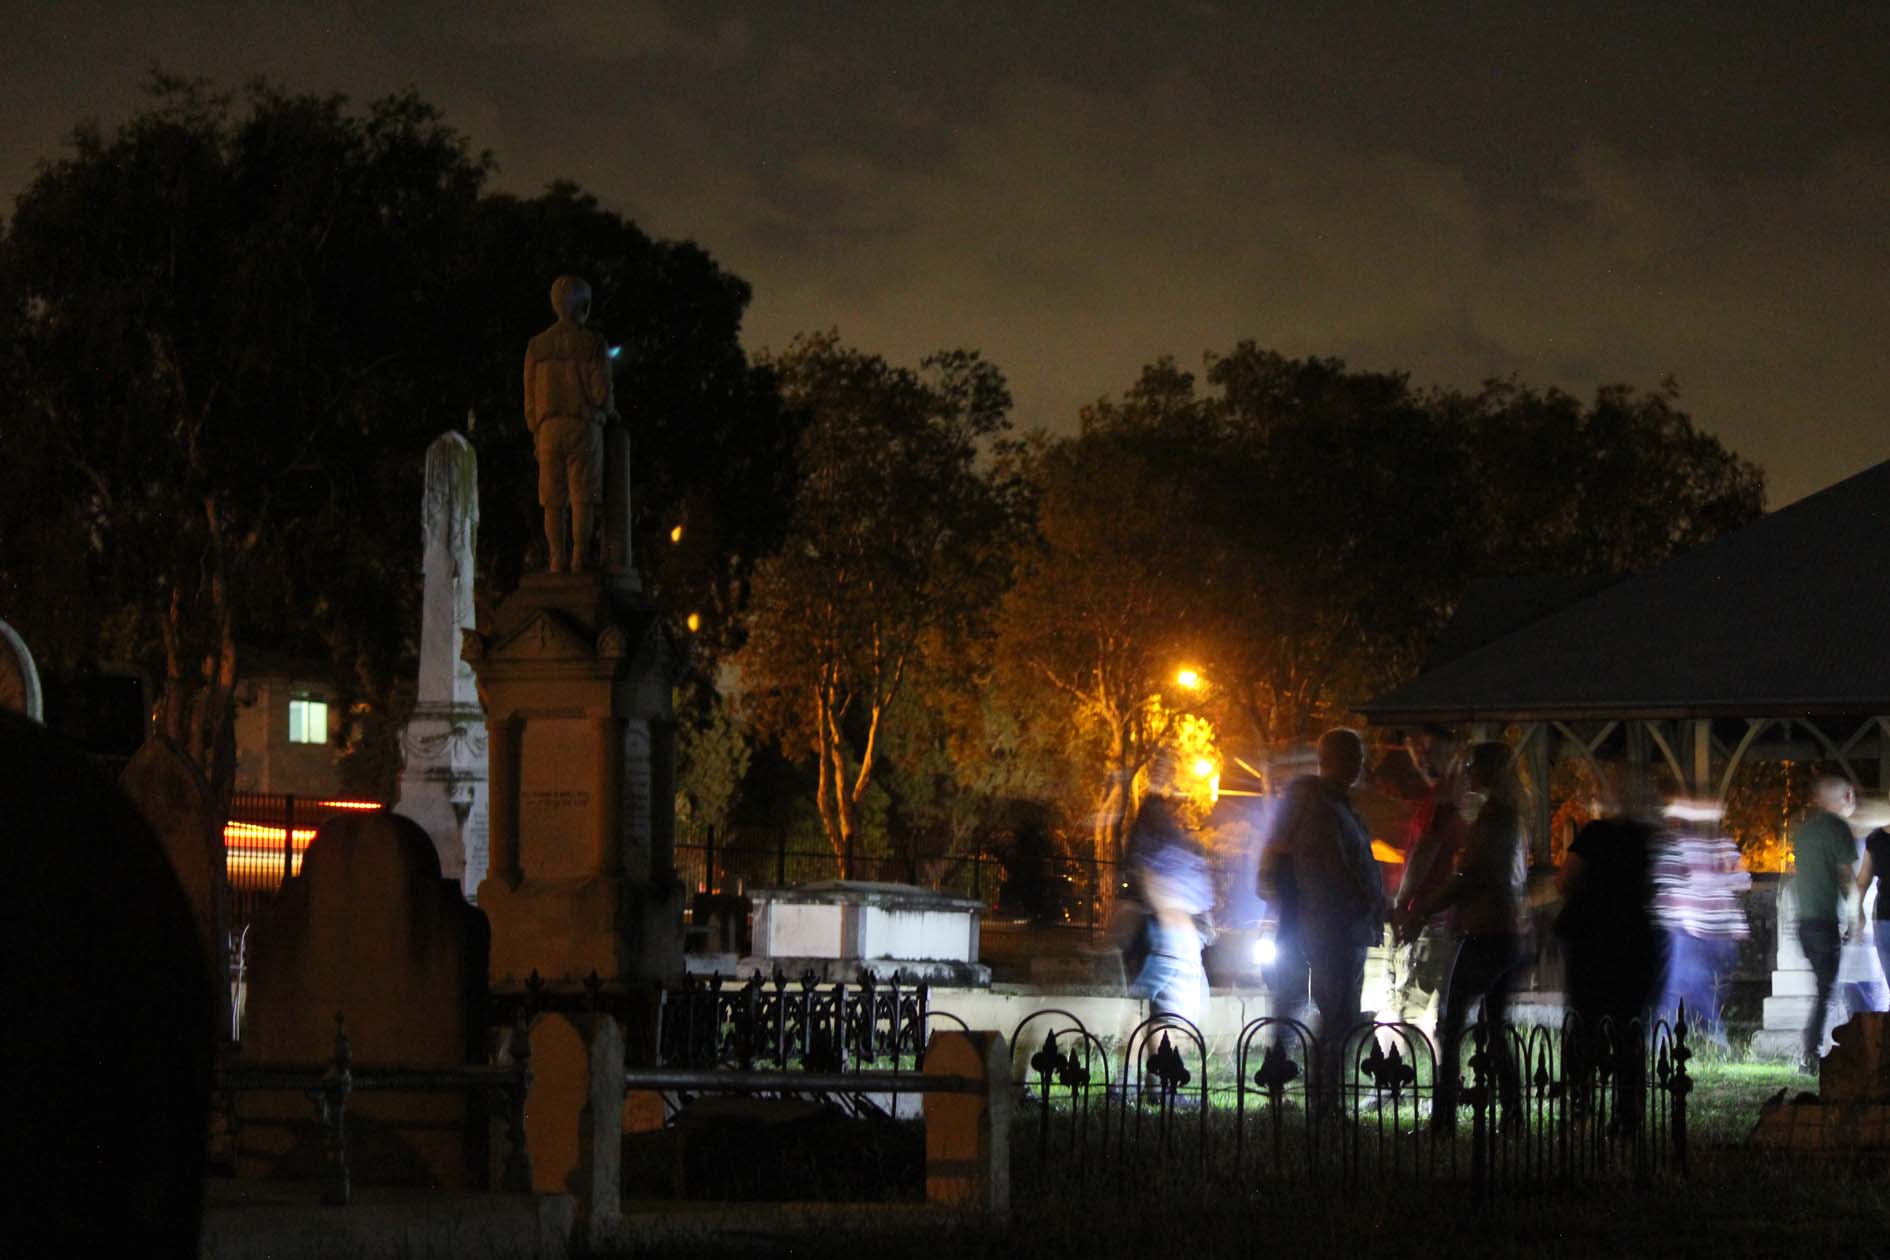 Ghost Tour at the Ipswich Cemetery